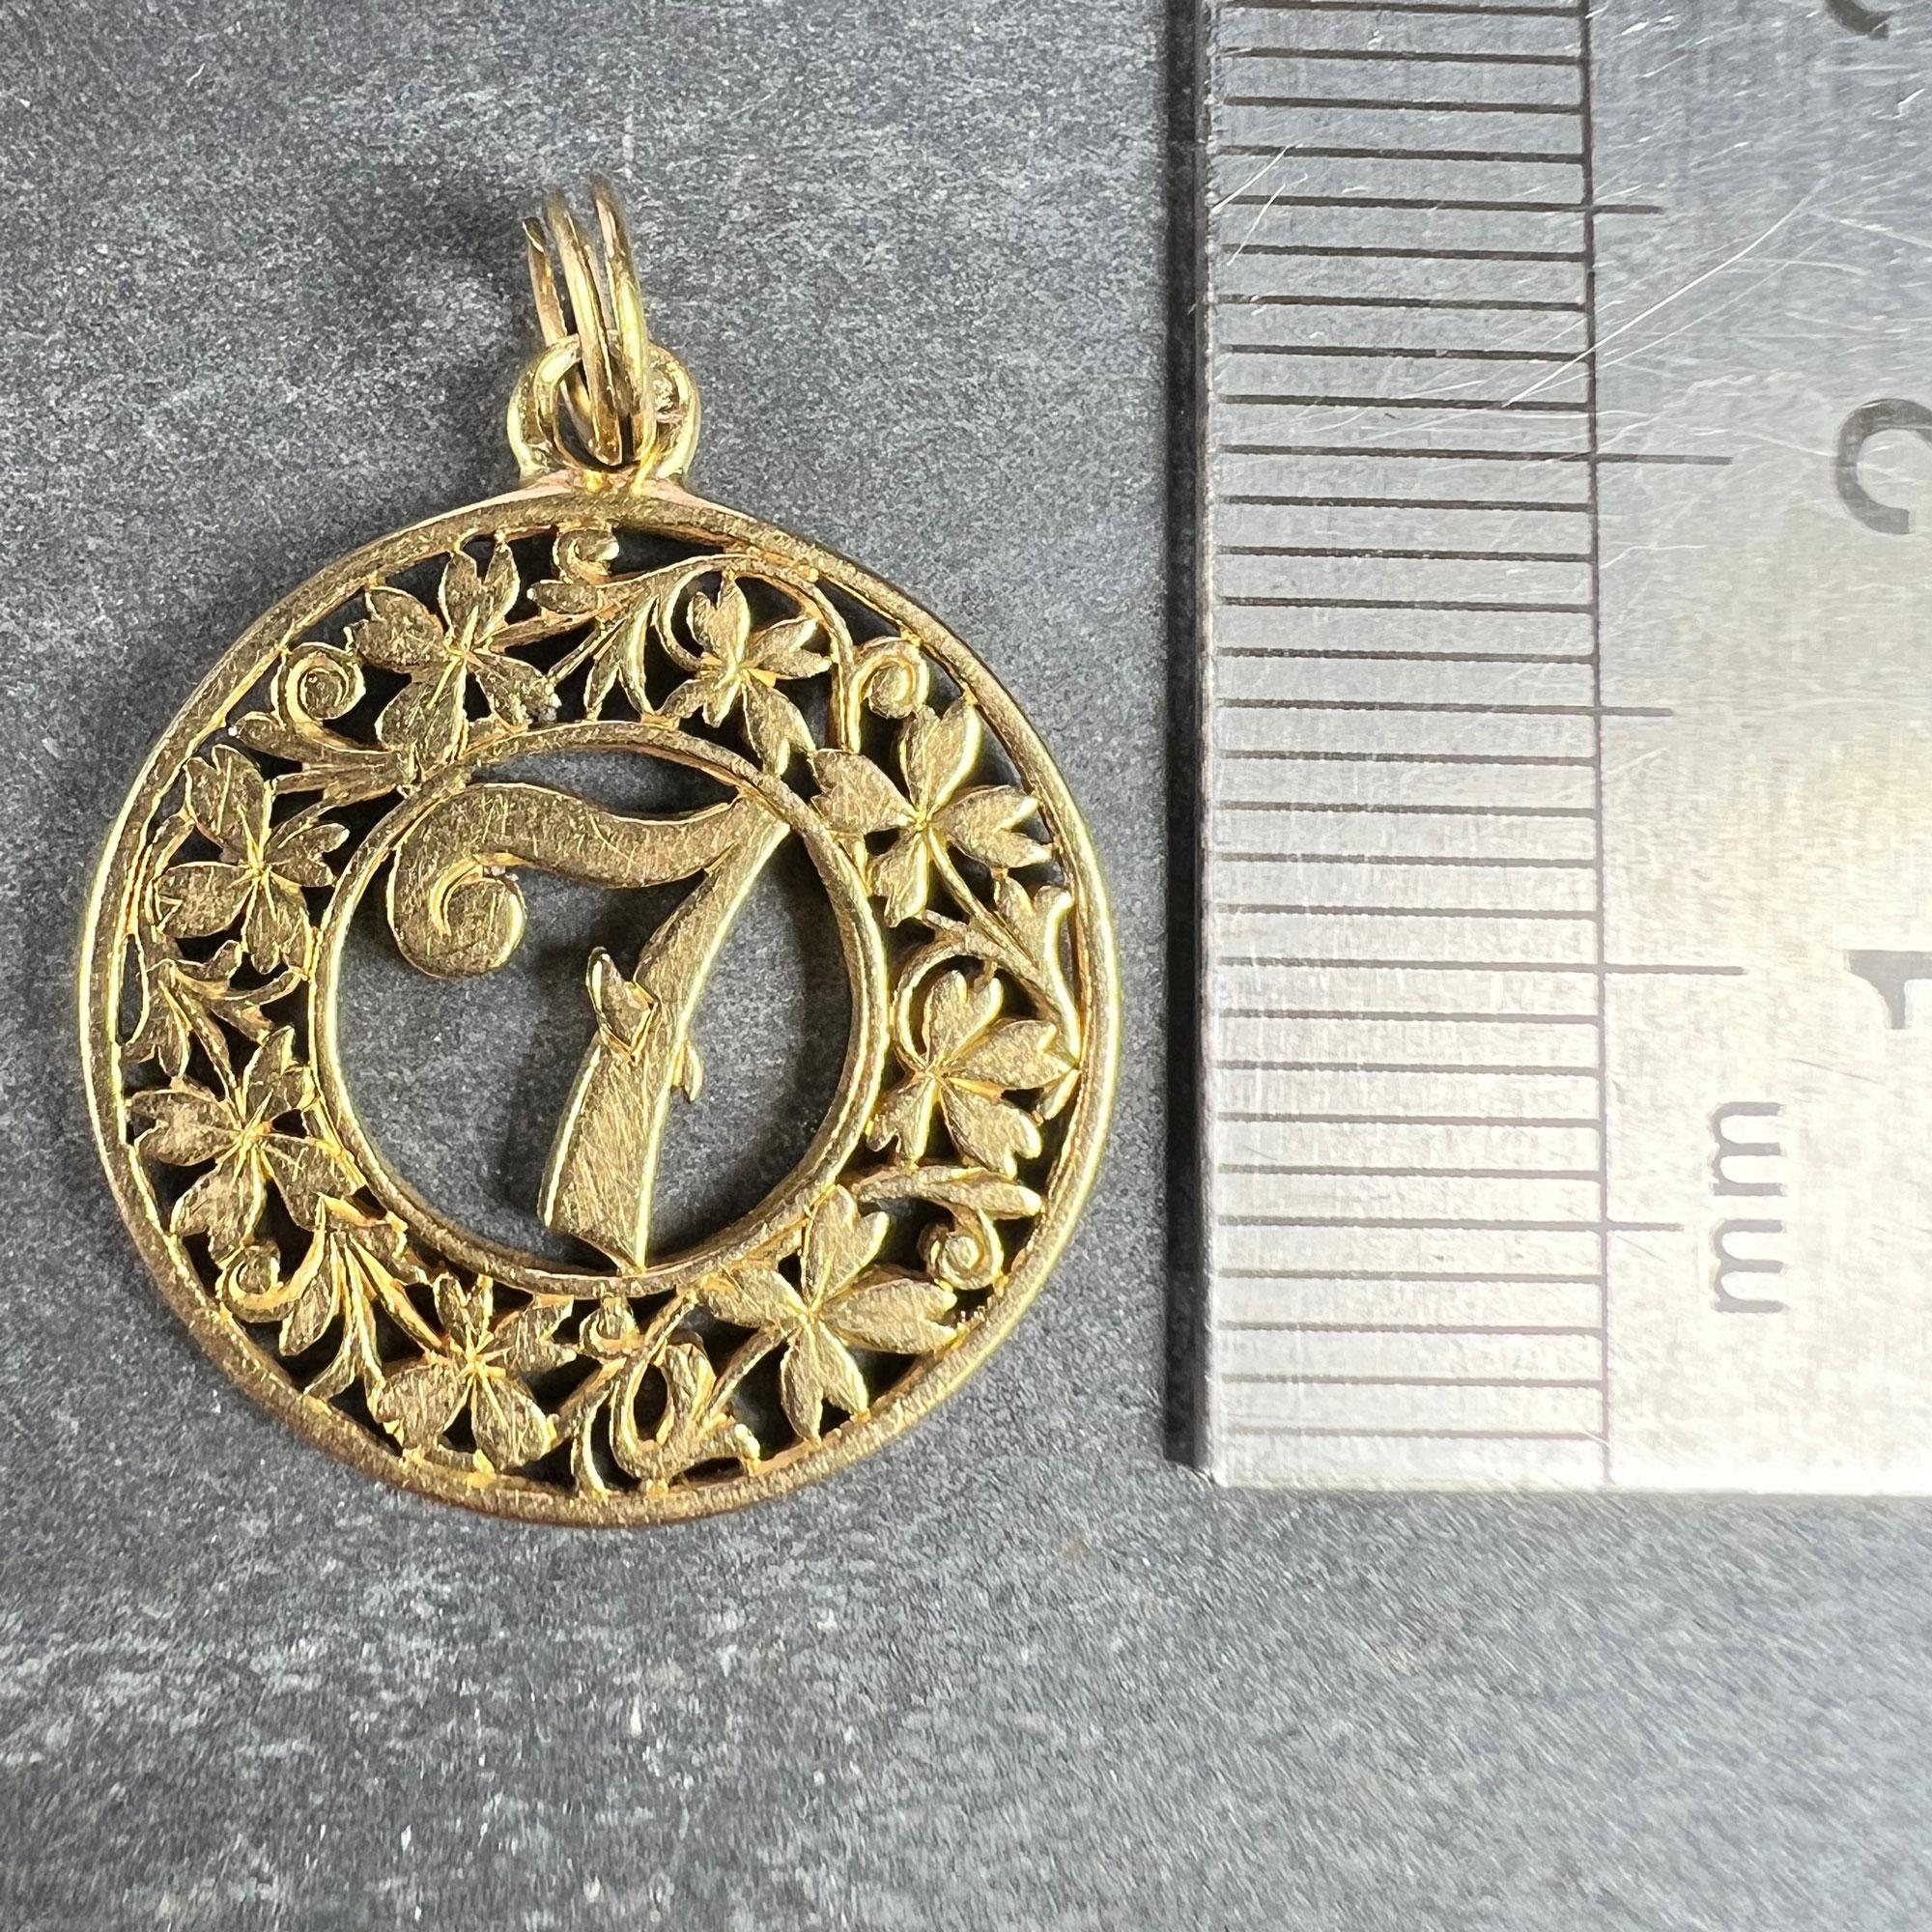 Lucky 'Number 7' Four Leaf Clover 18K Yellow Gold Good Luck Charm Pendant For Sale 3